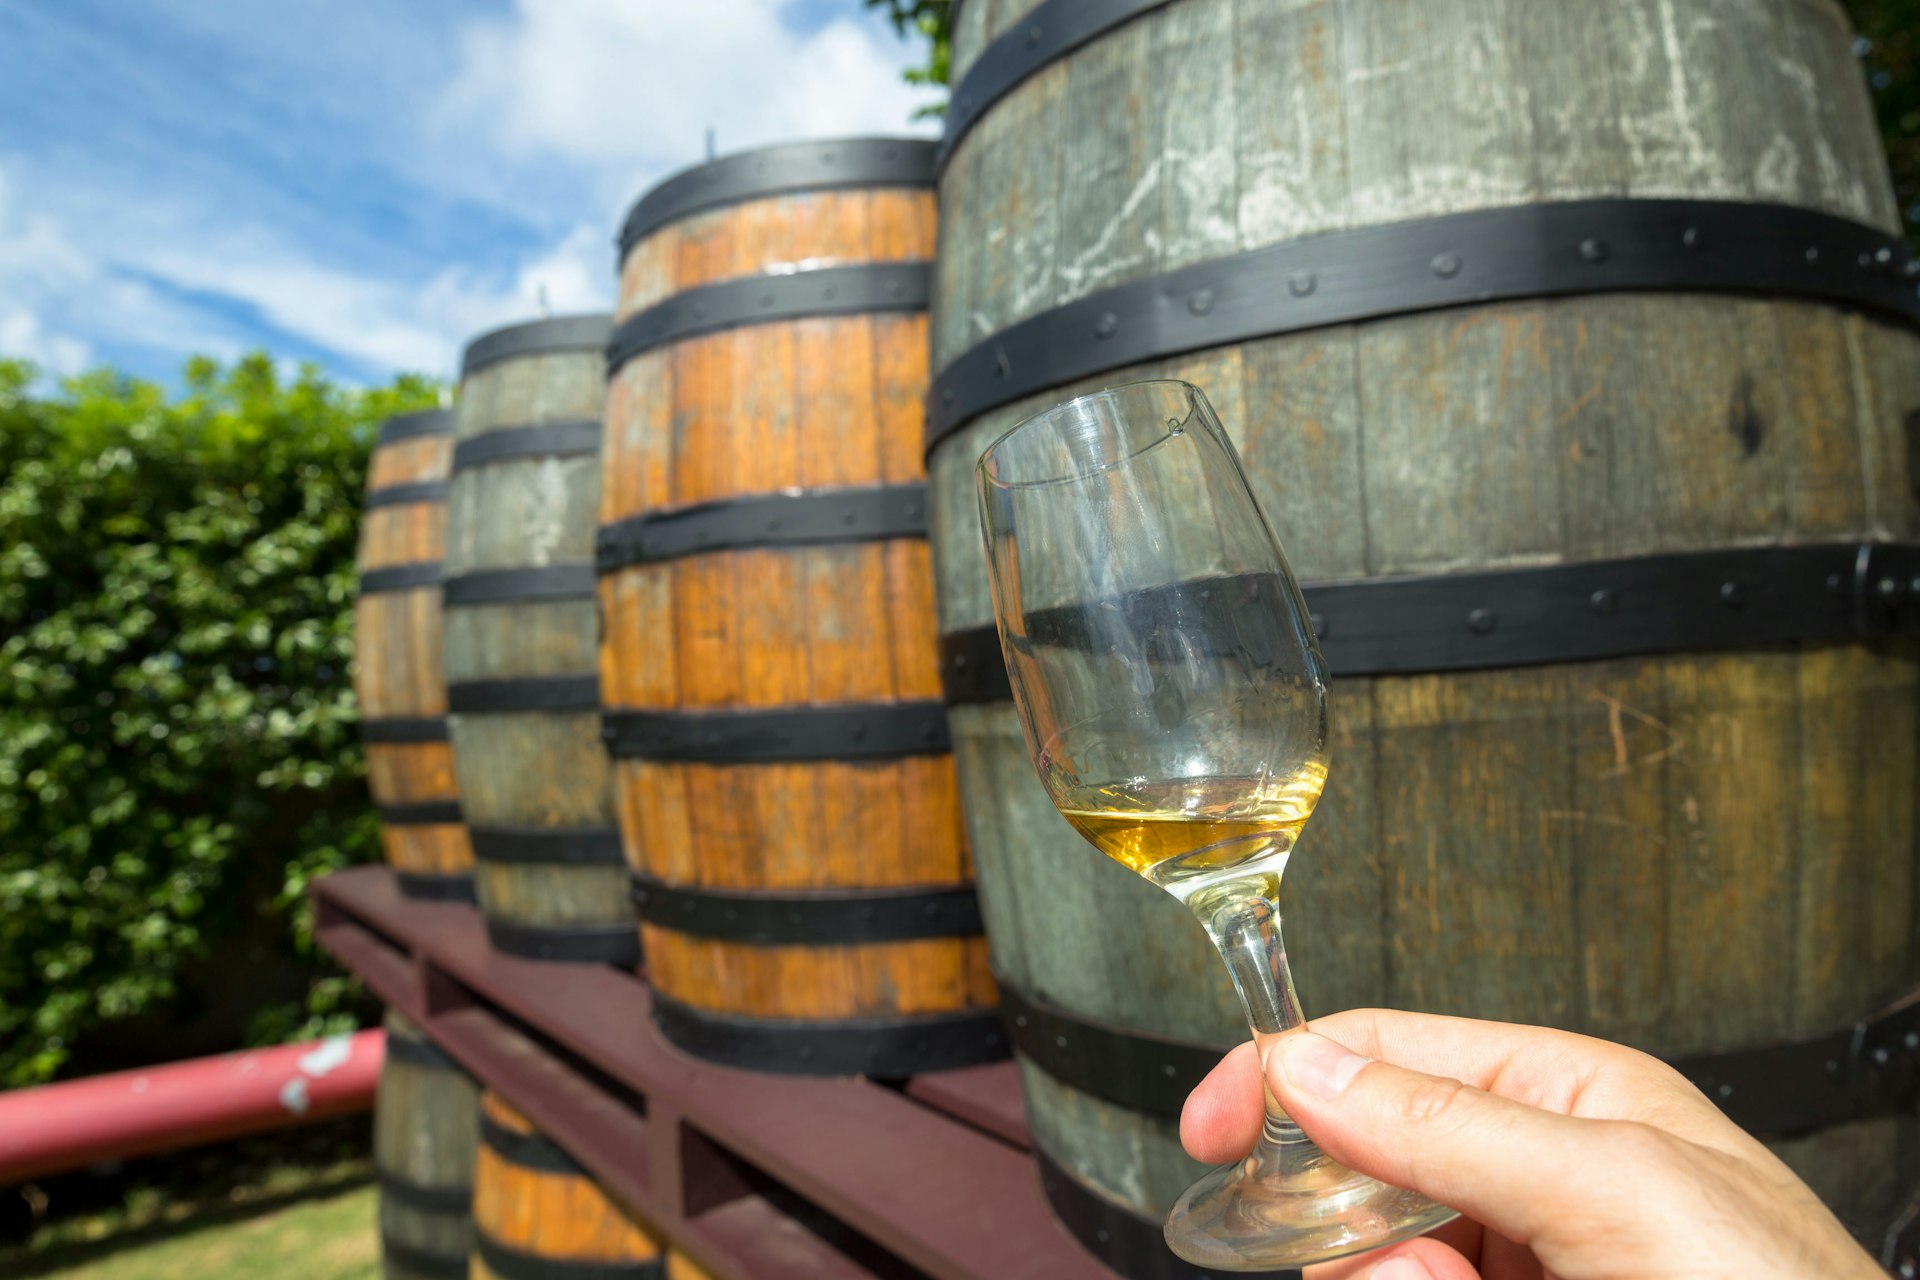 A hand holds out a glass of rum in front of some wooden barrels